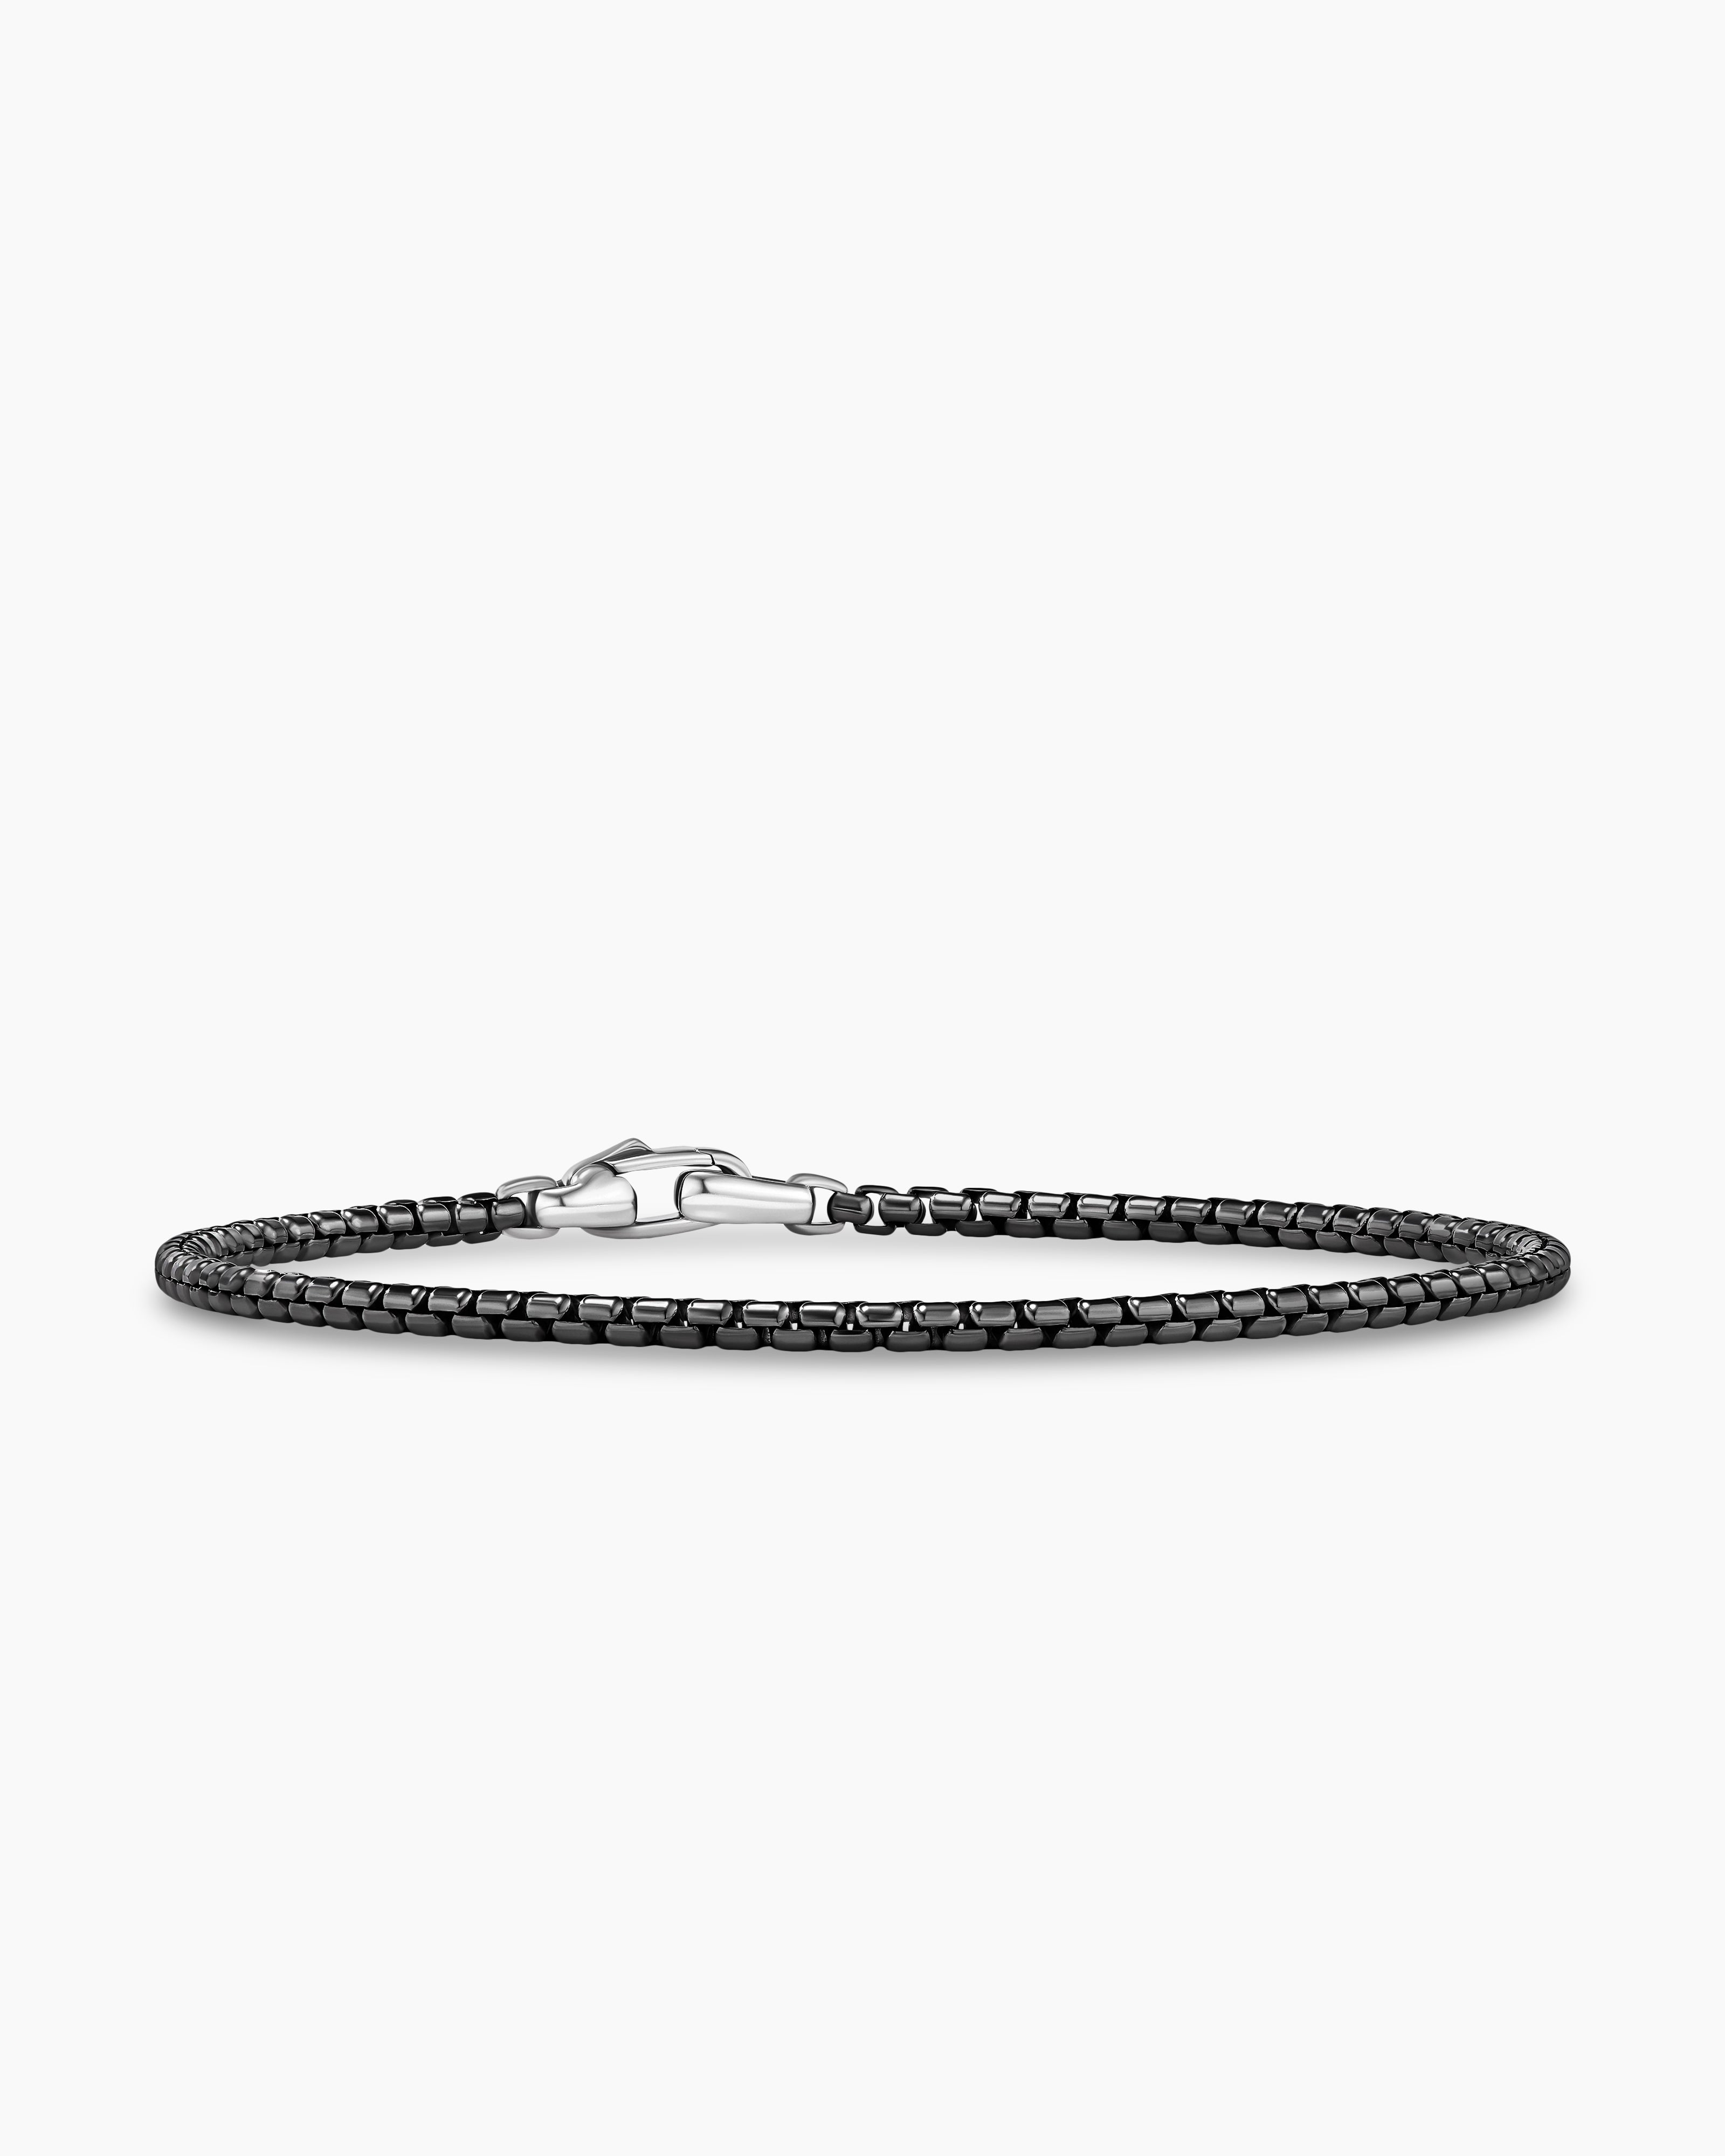 DAVID YURMAN Box Chain Bracelet In Stainless Steel And Sterling Silver